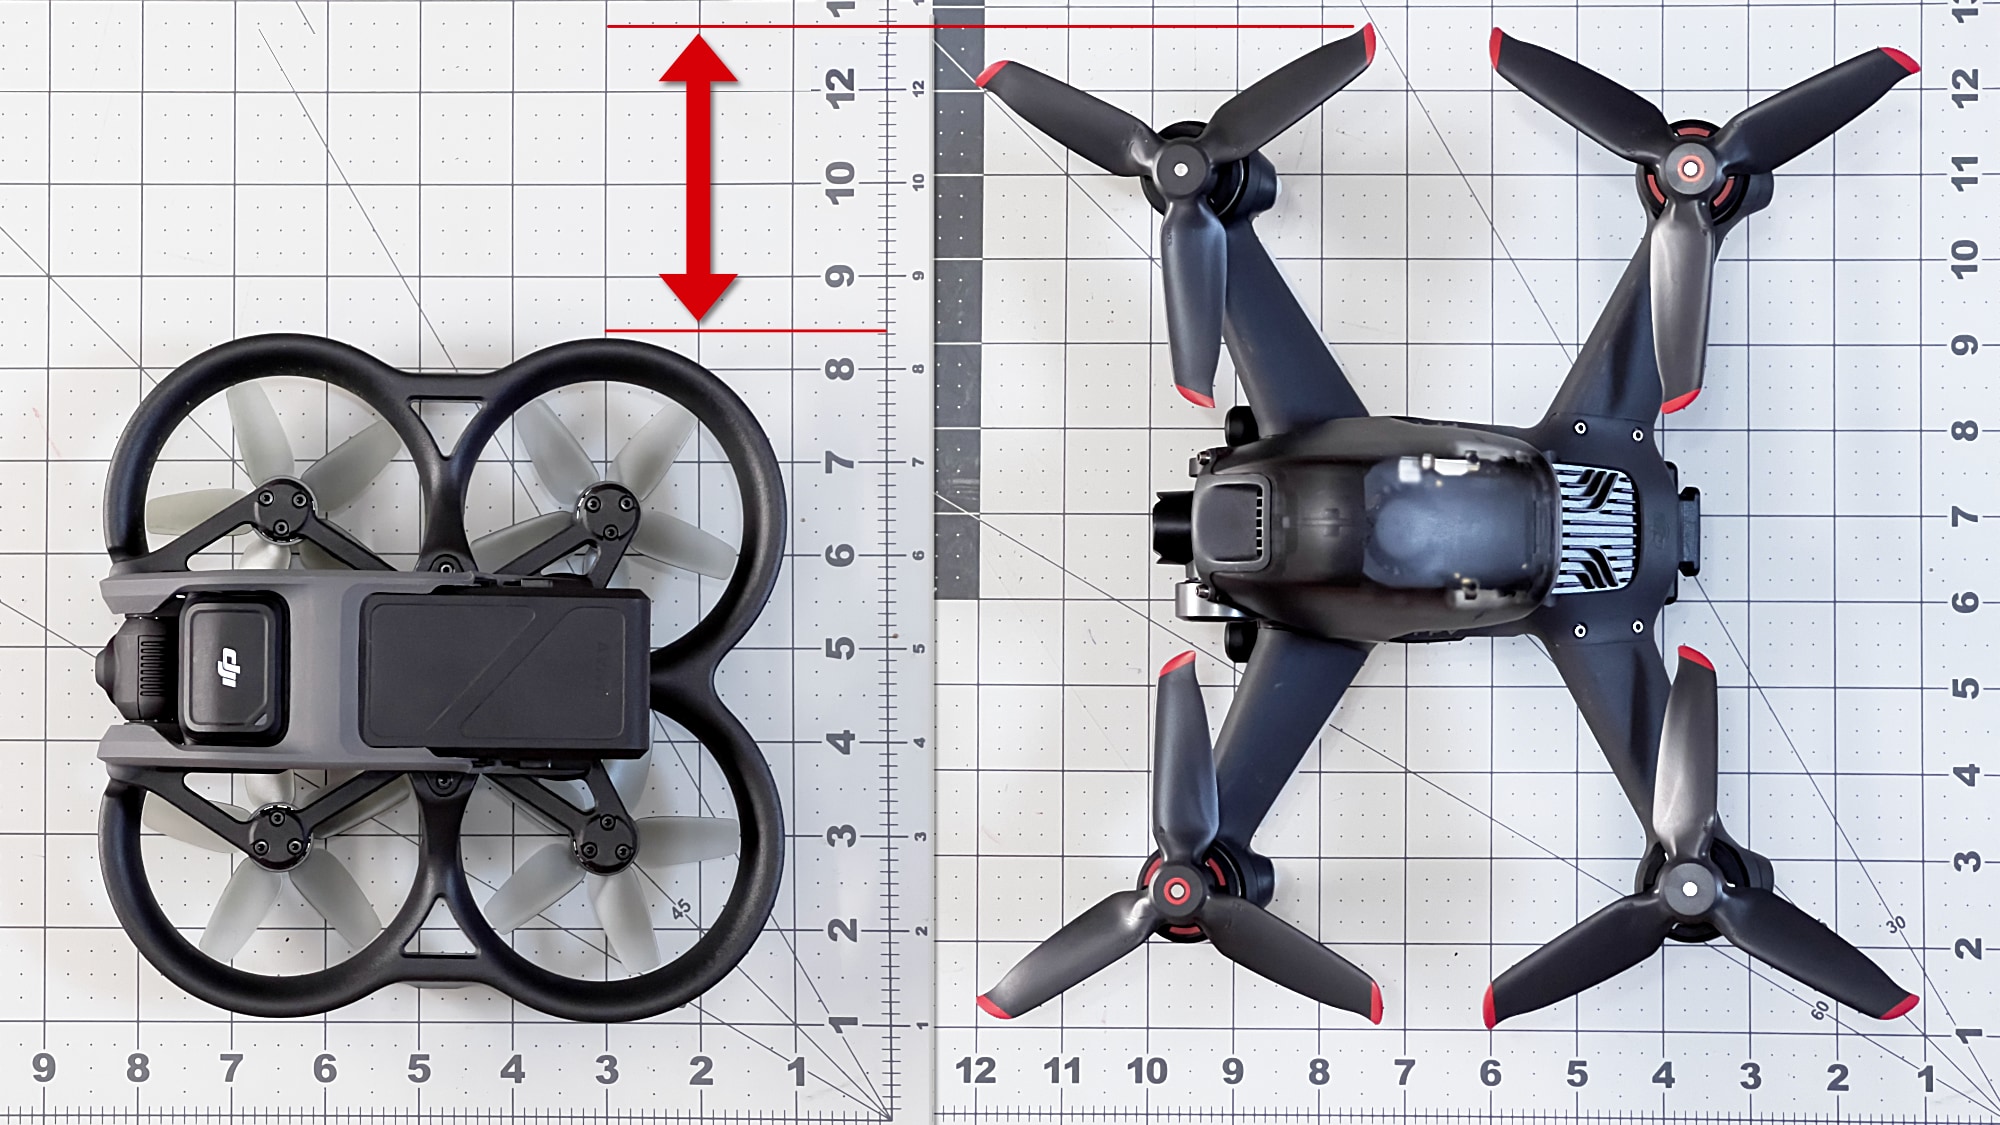 DJI Avata Pro-View Combo vs Fly Smart Combo: Which Should I Buy?